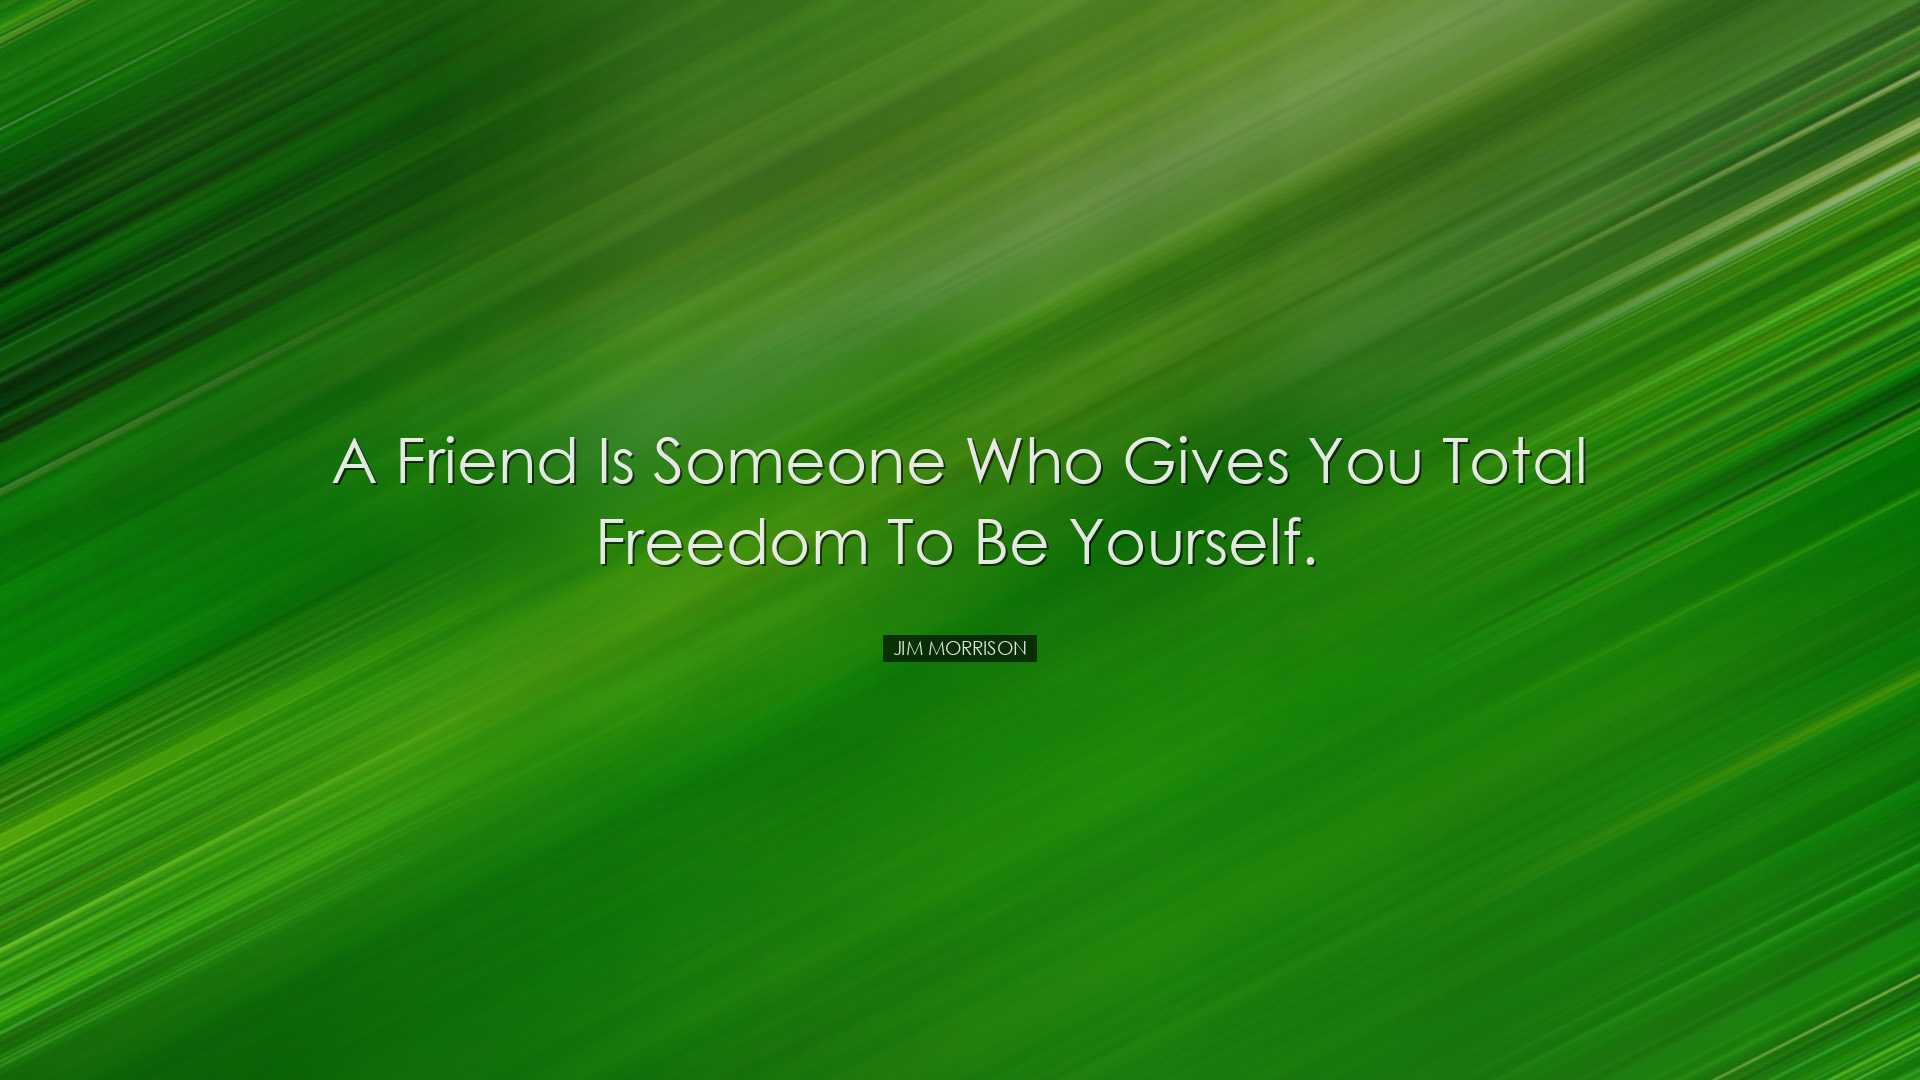 A friend is someone who gives you total freedom to be yourself. -